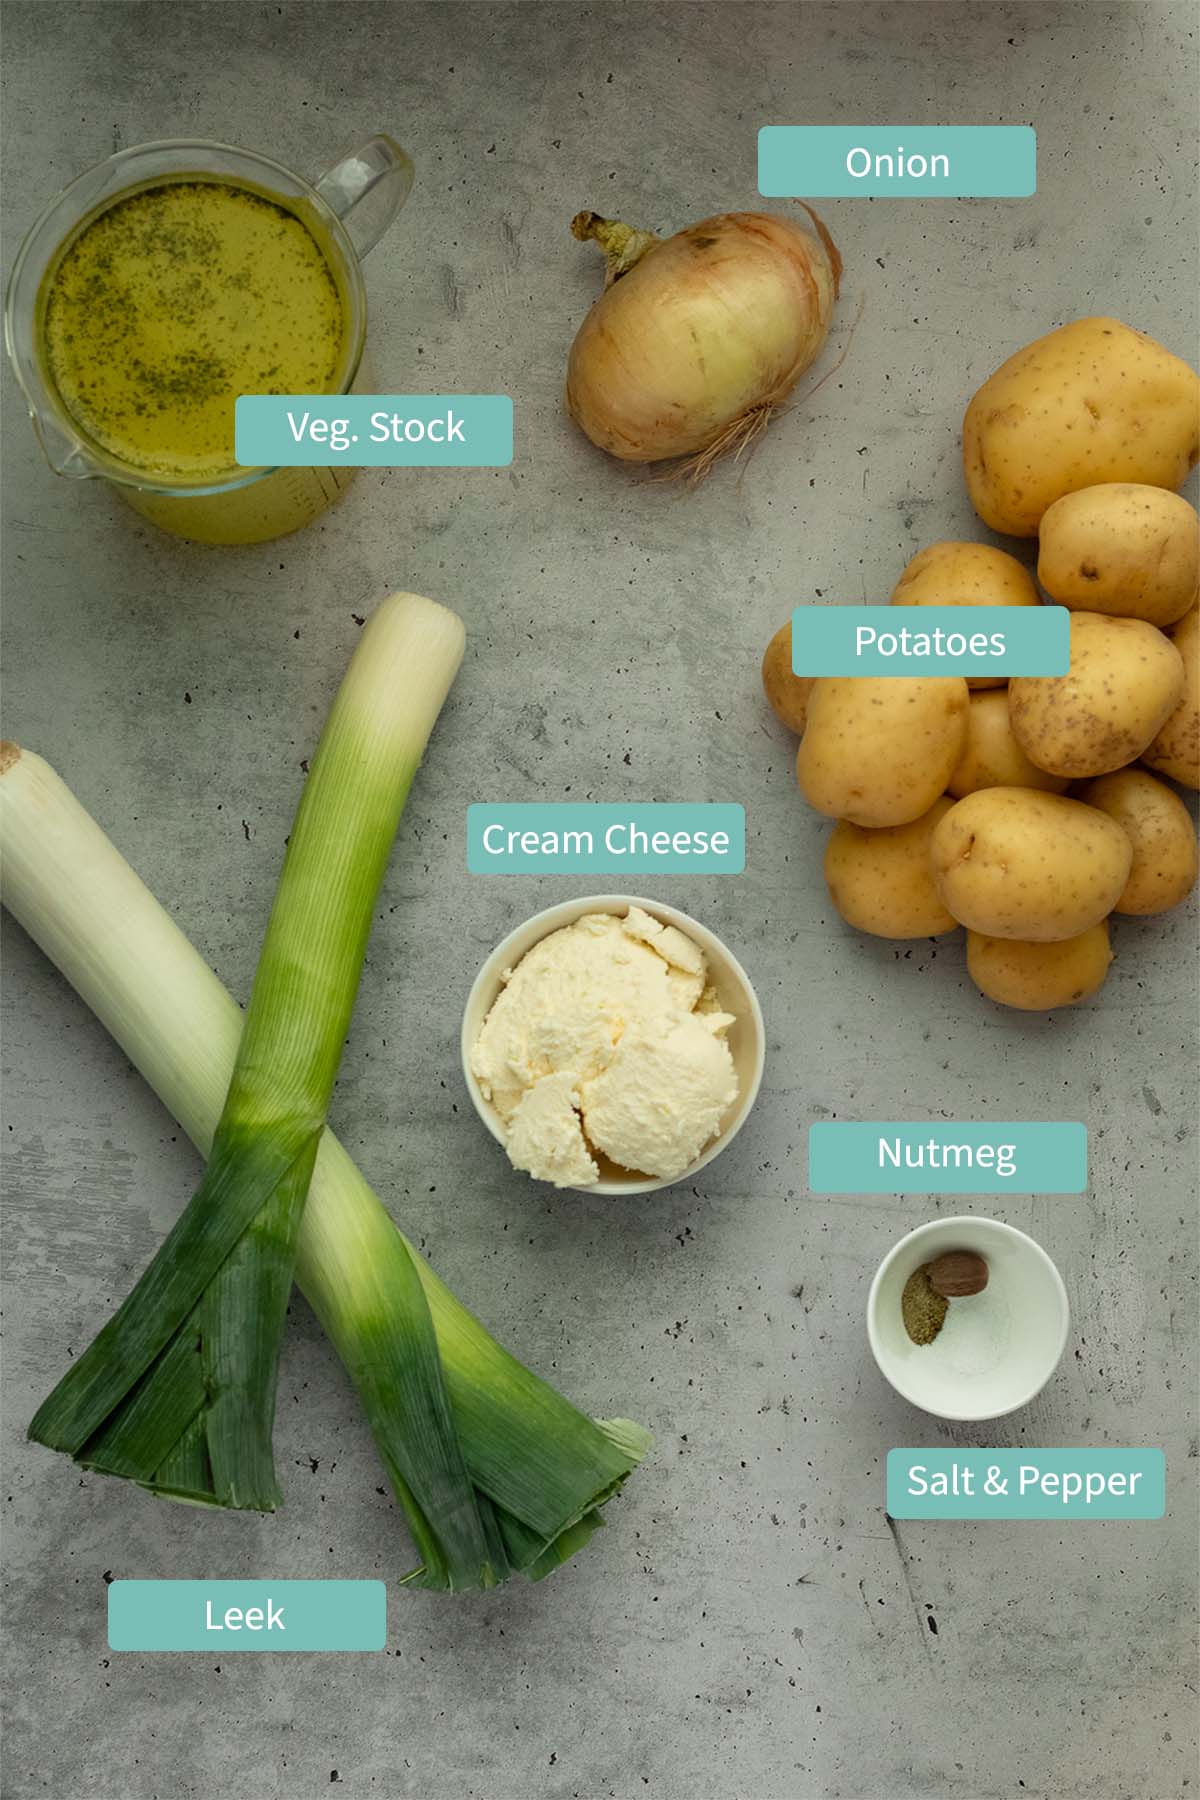 picture showing all ingredients needed for this soup